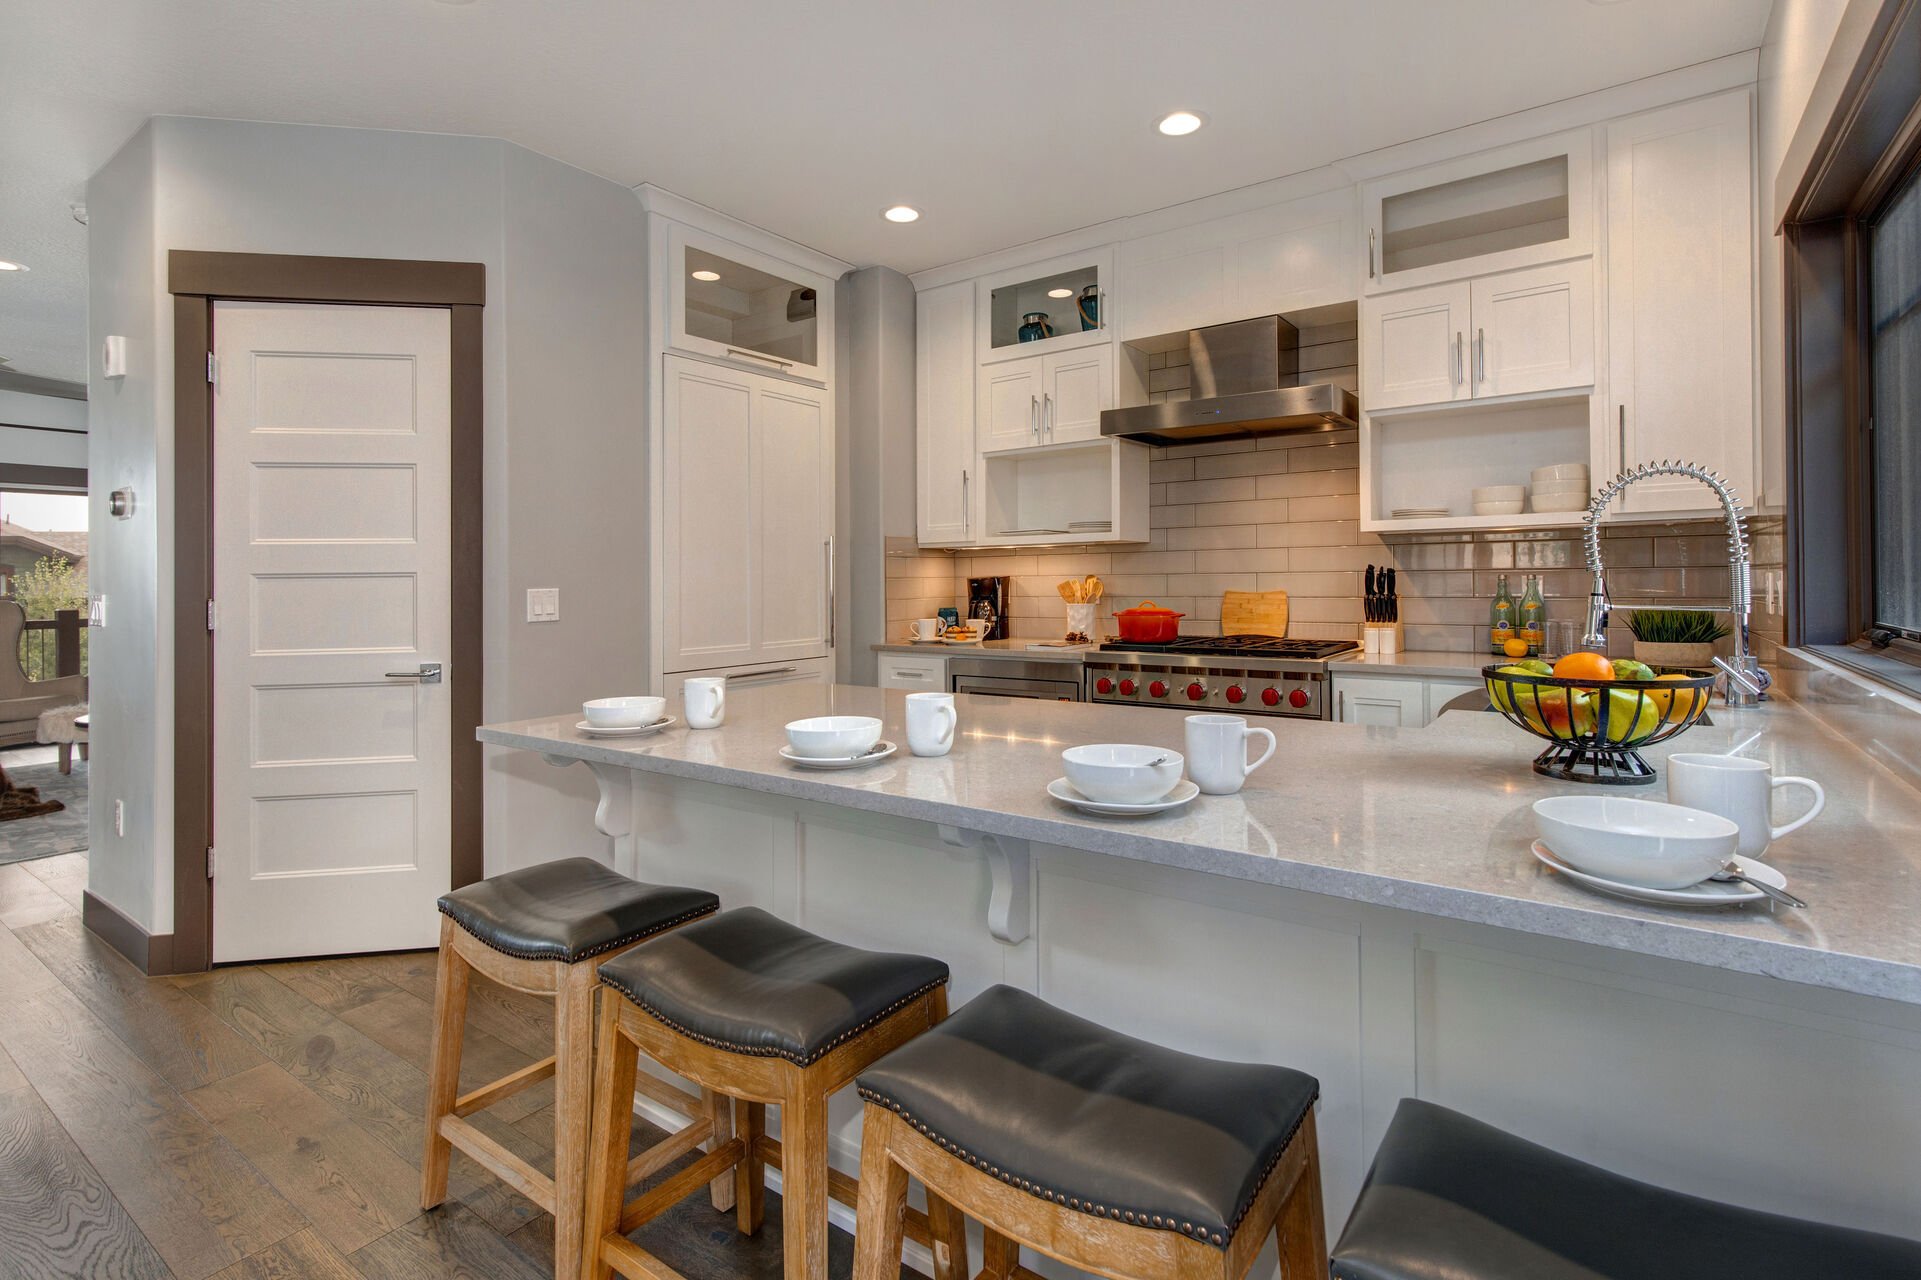 Fully Equipped Kitchen with stunning stone countertops, stainless steel Wolf appliances, SubZero fridge, and bar seating for four